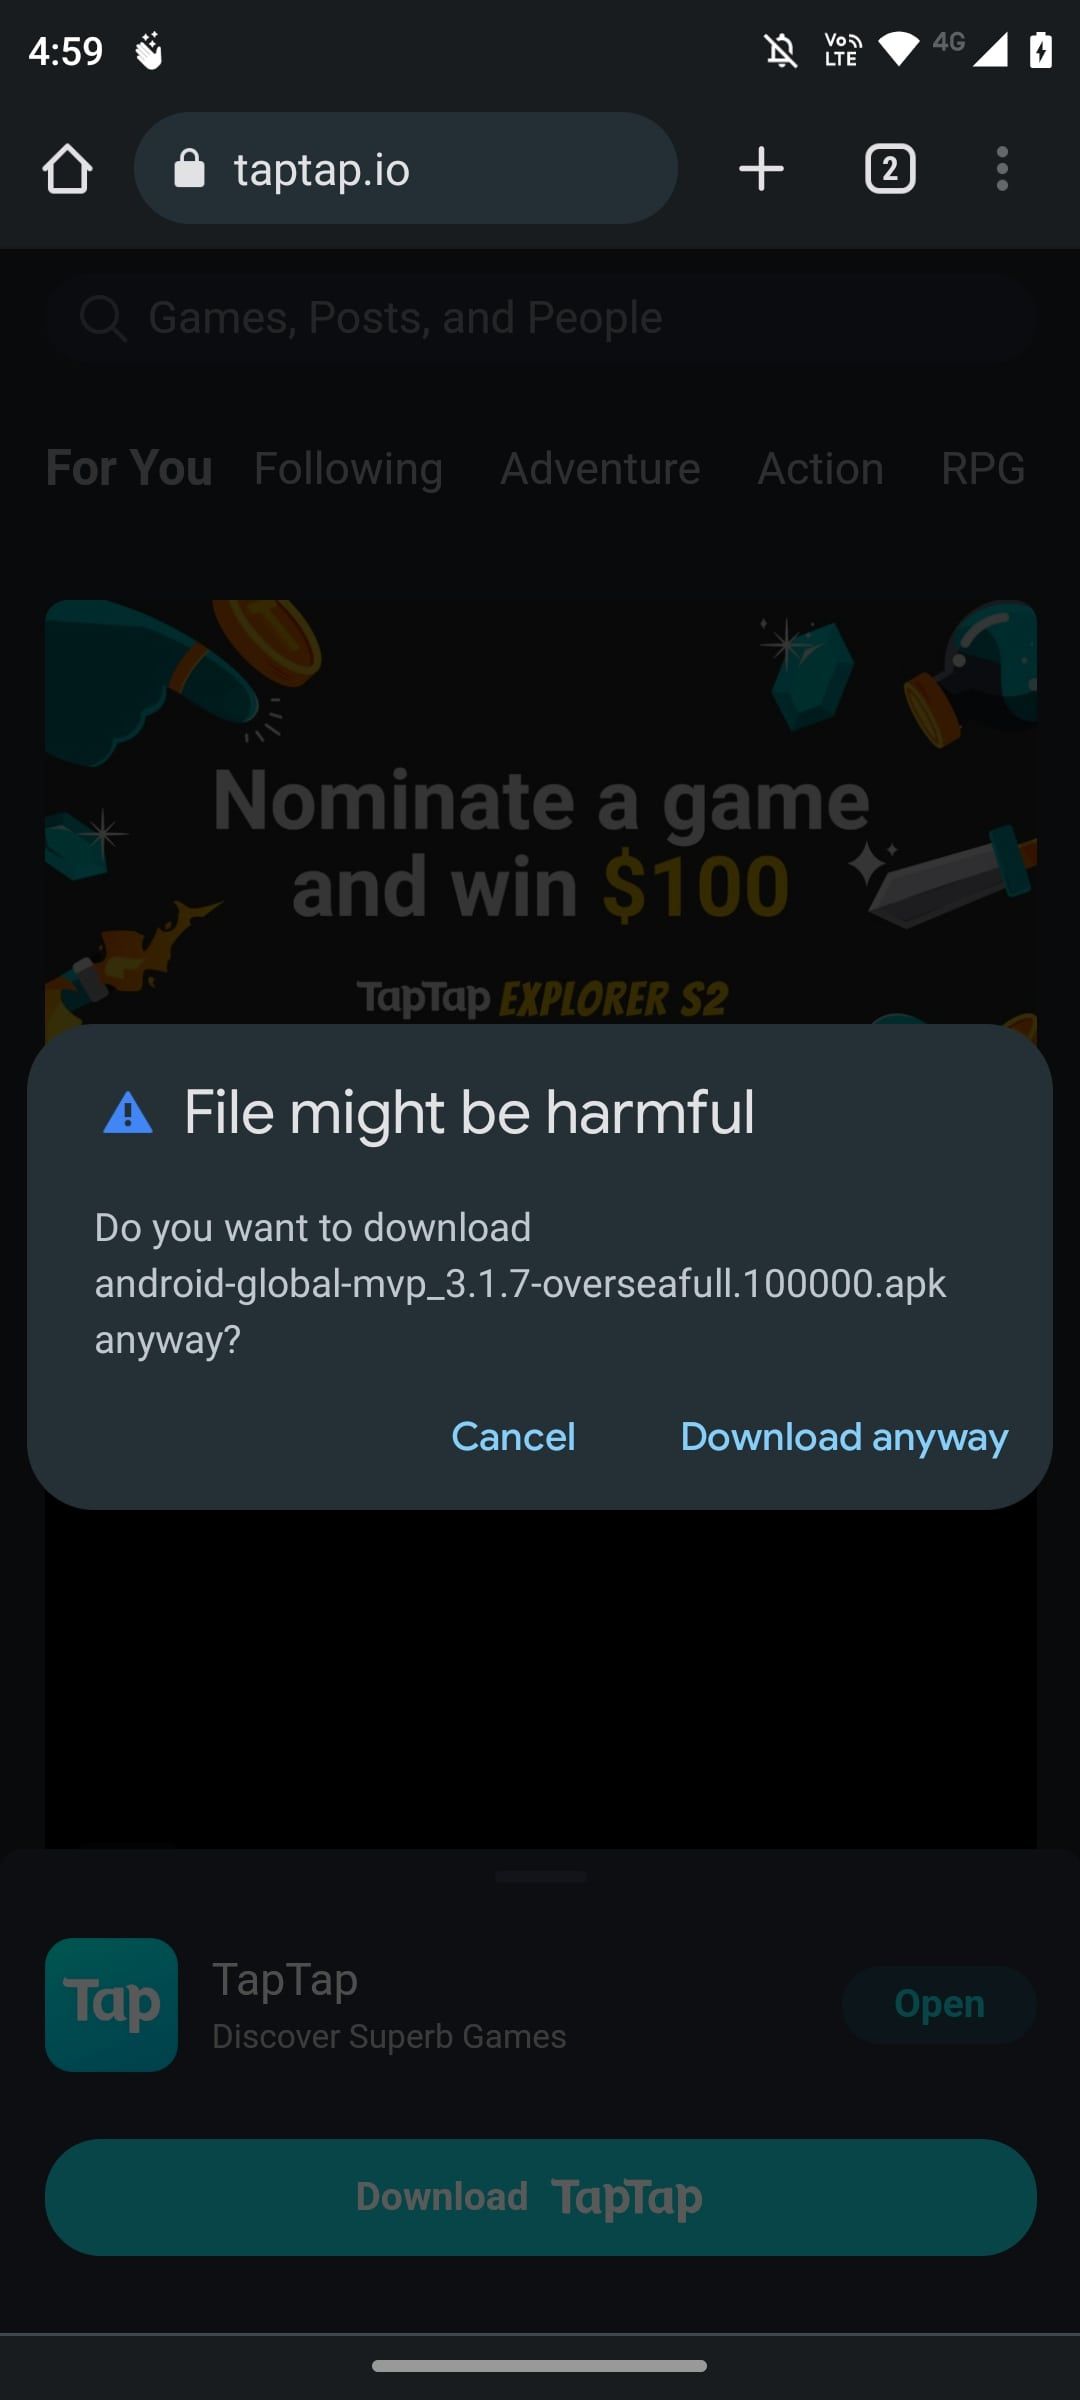 Browser popup warning about file download